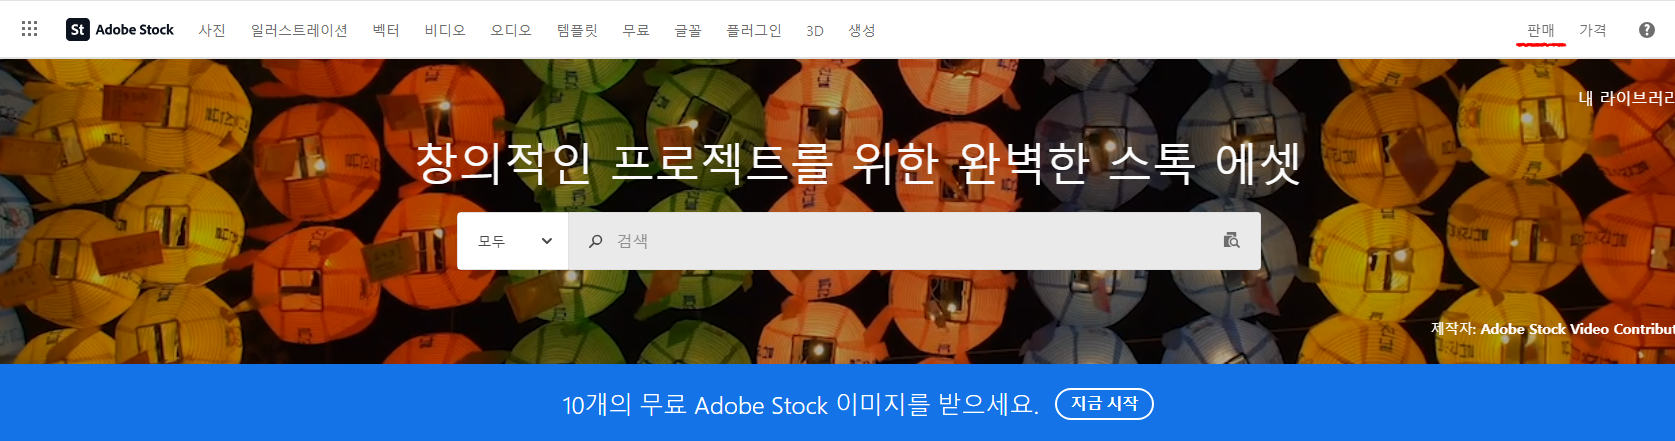 Adobe-Stock-Homepage-click-to-sale-button